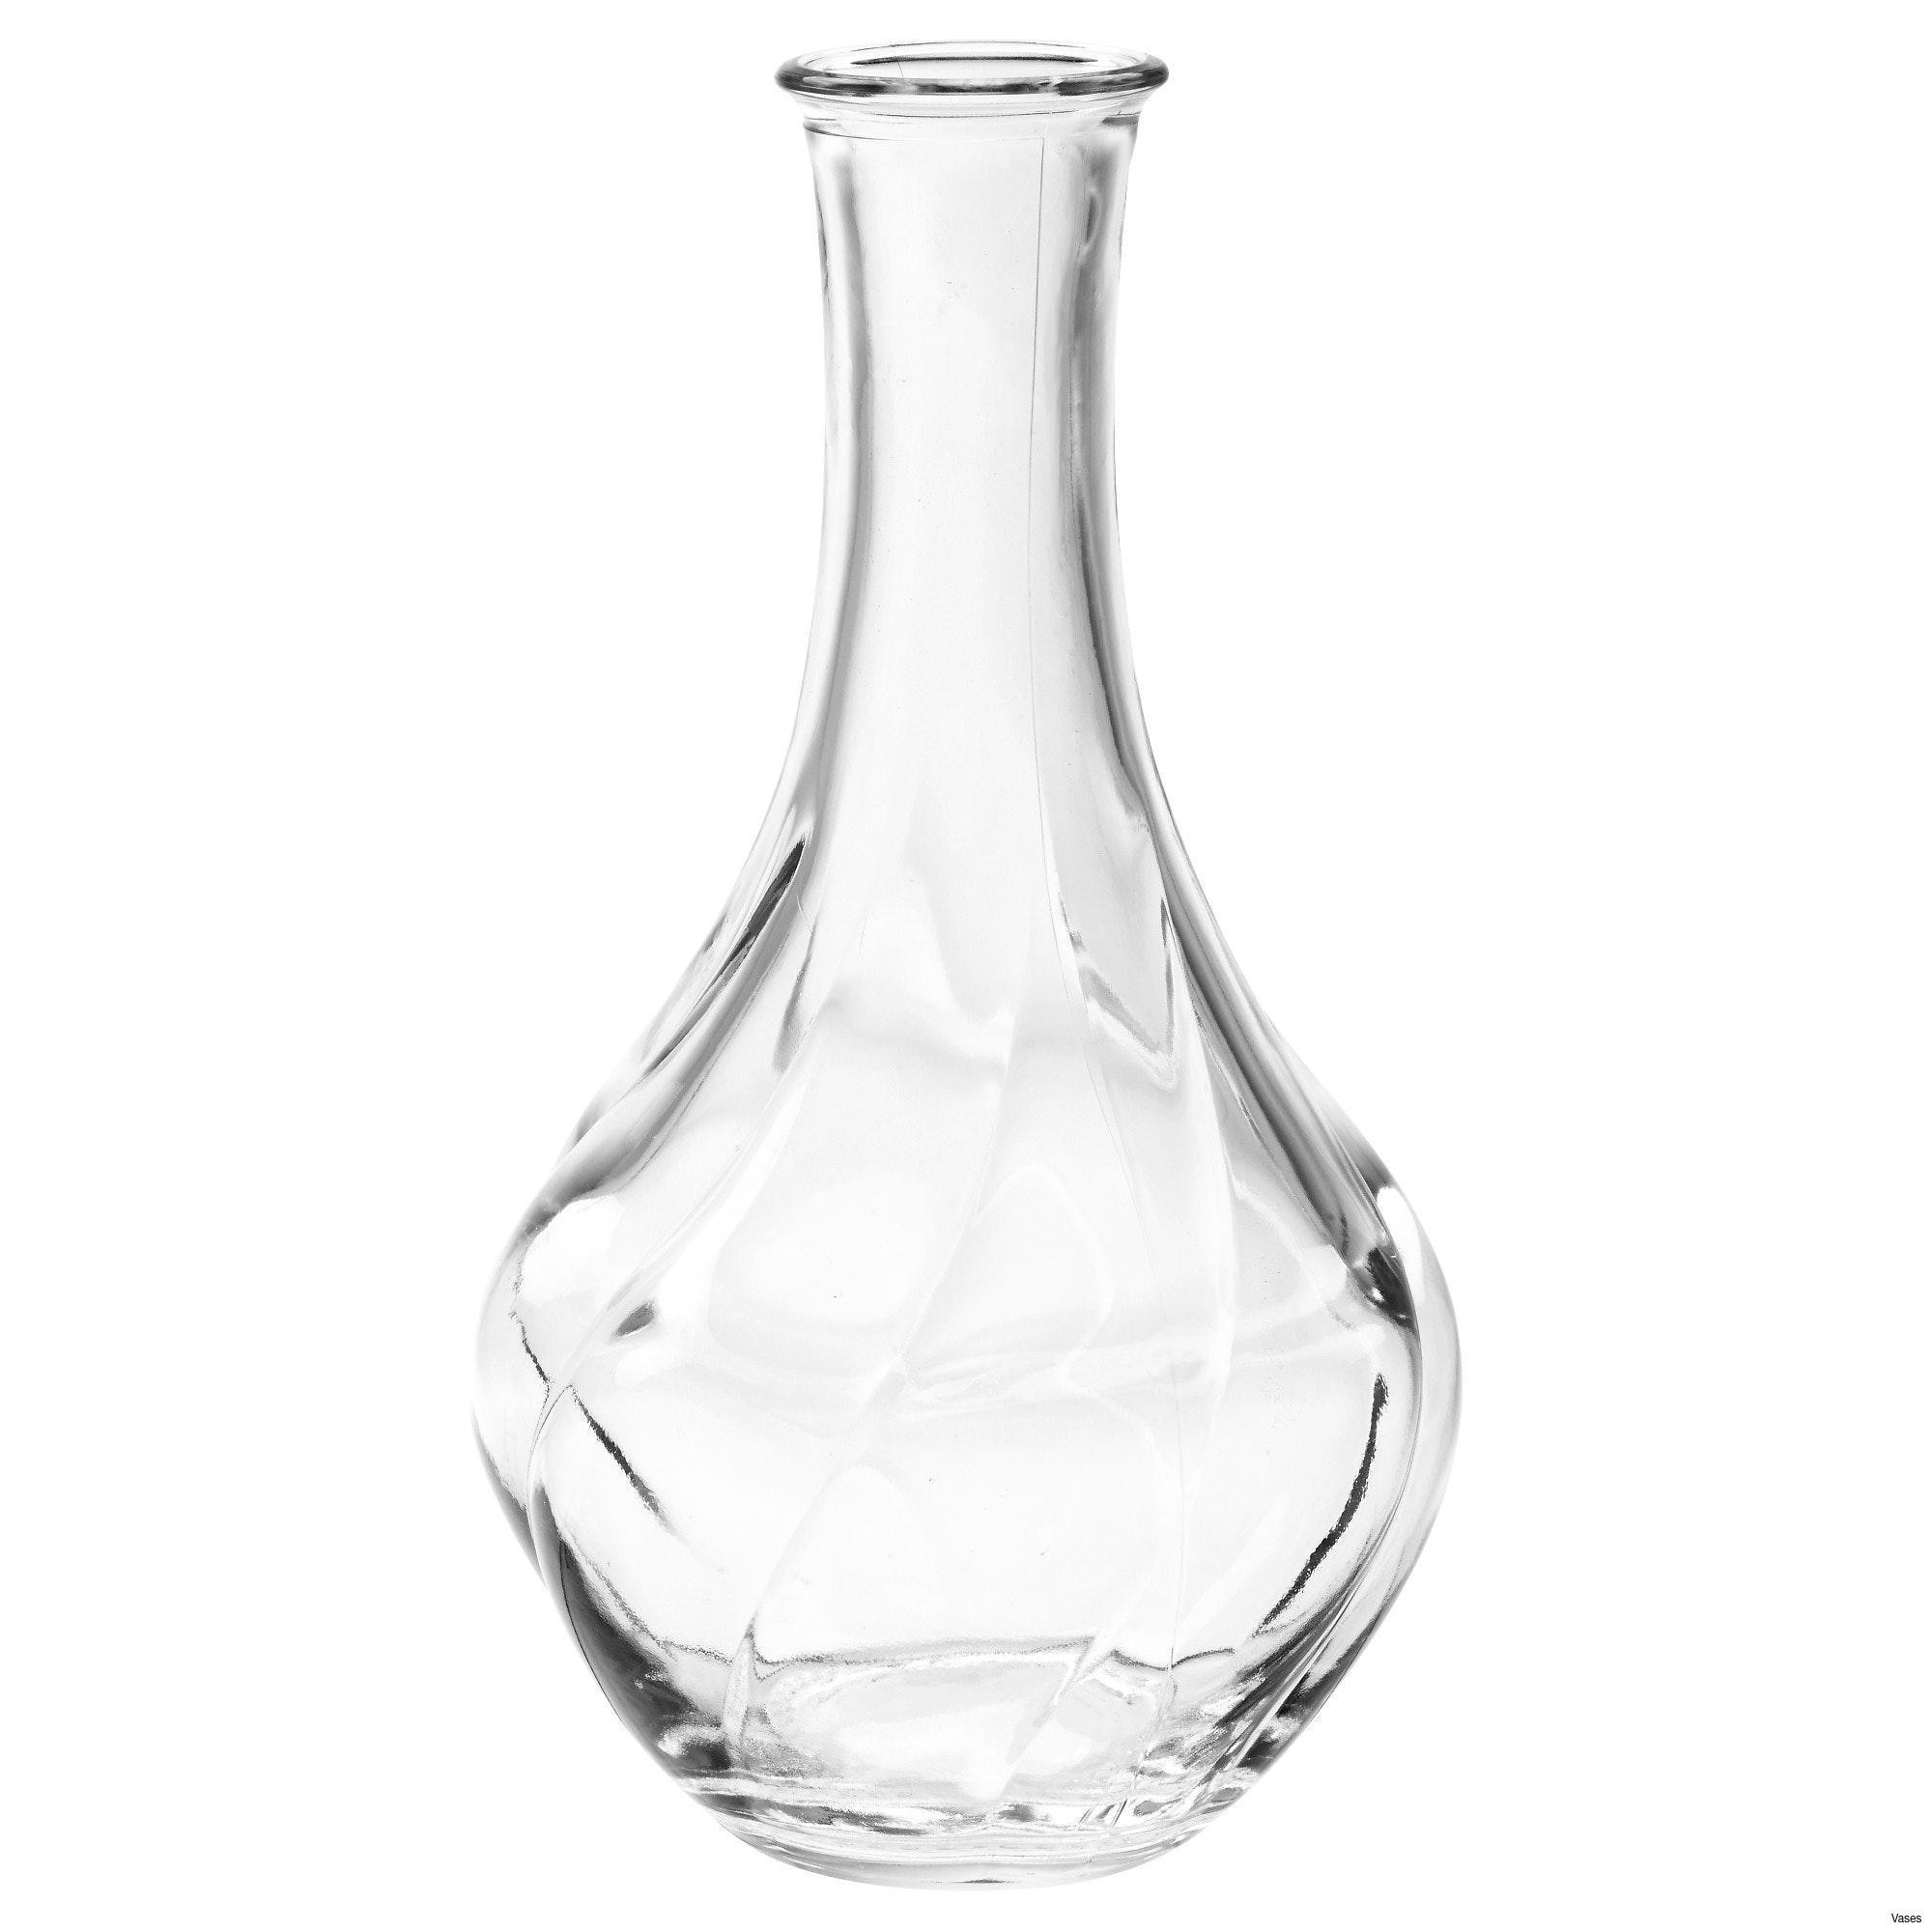 large vase fountains of photograph of glass vases with lids vases artificial plants in glass vases with lids image living room glass vases fresh clear vase 0d tags amazing and